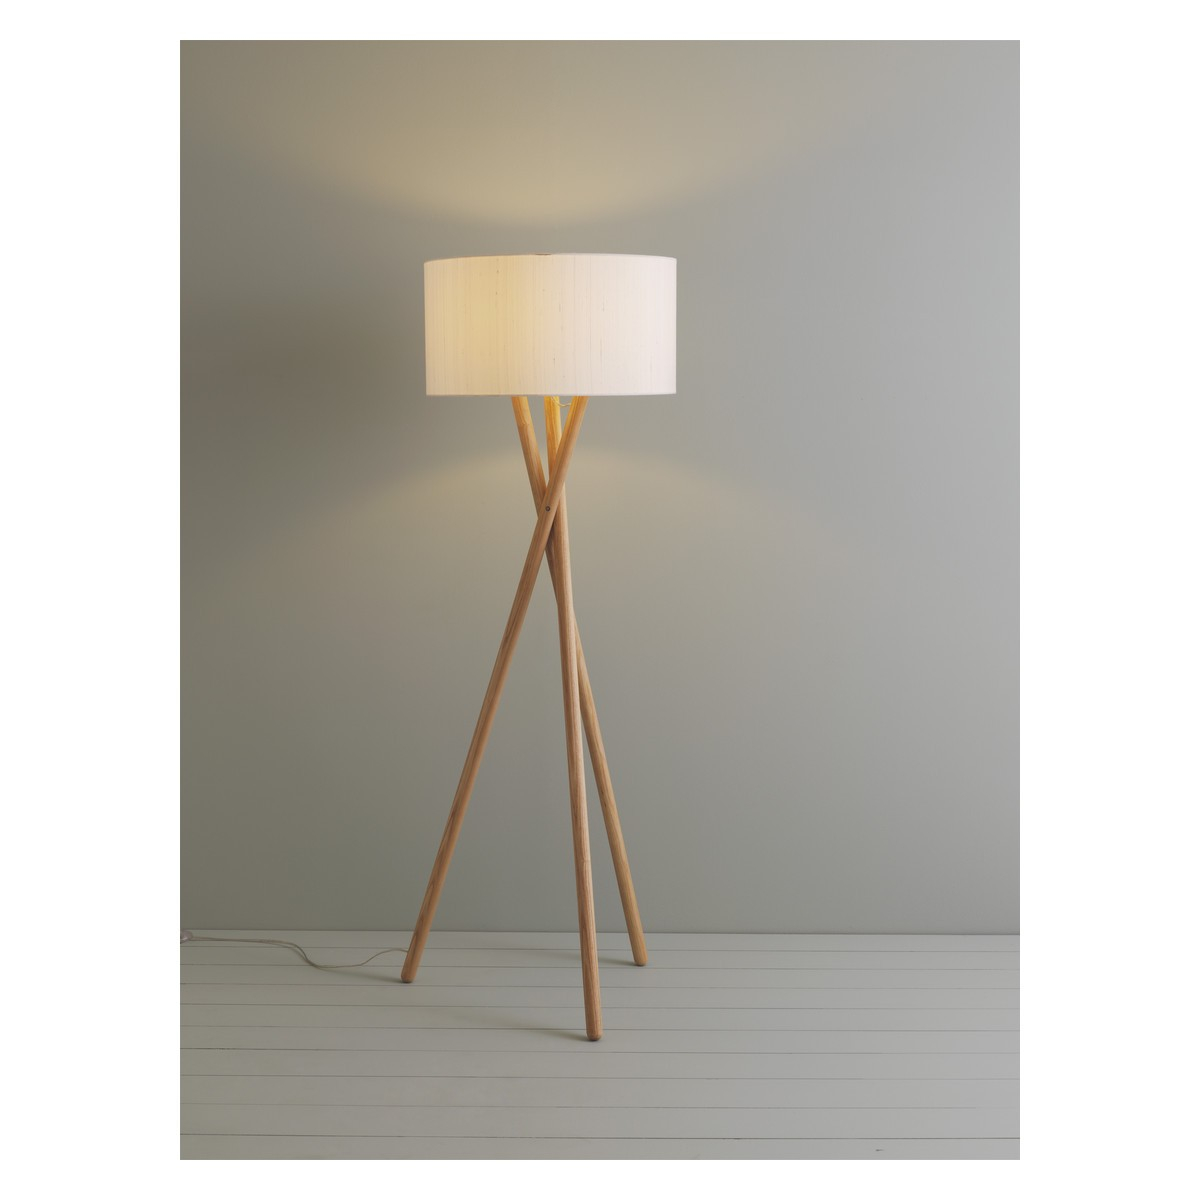 New Wood Floor Lamp Wooden Colormehouse Com You Tube Base intended for dimensions 1200 X 1200